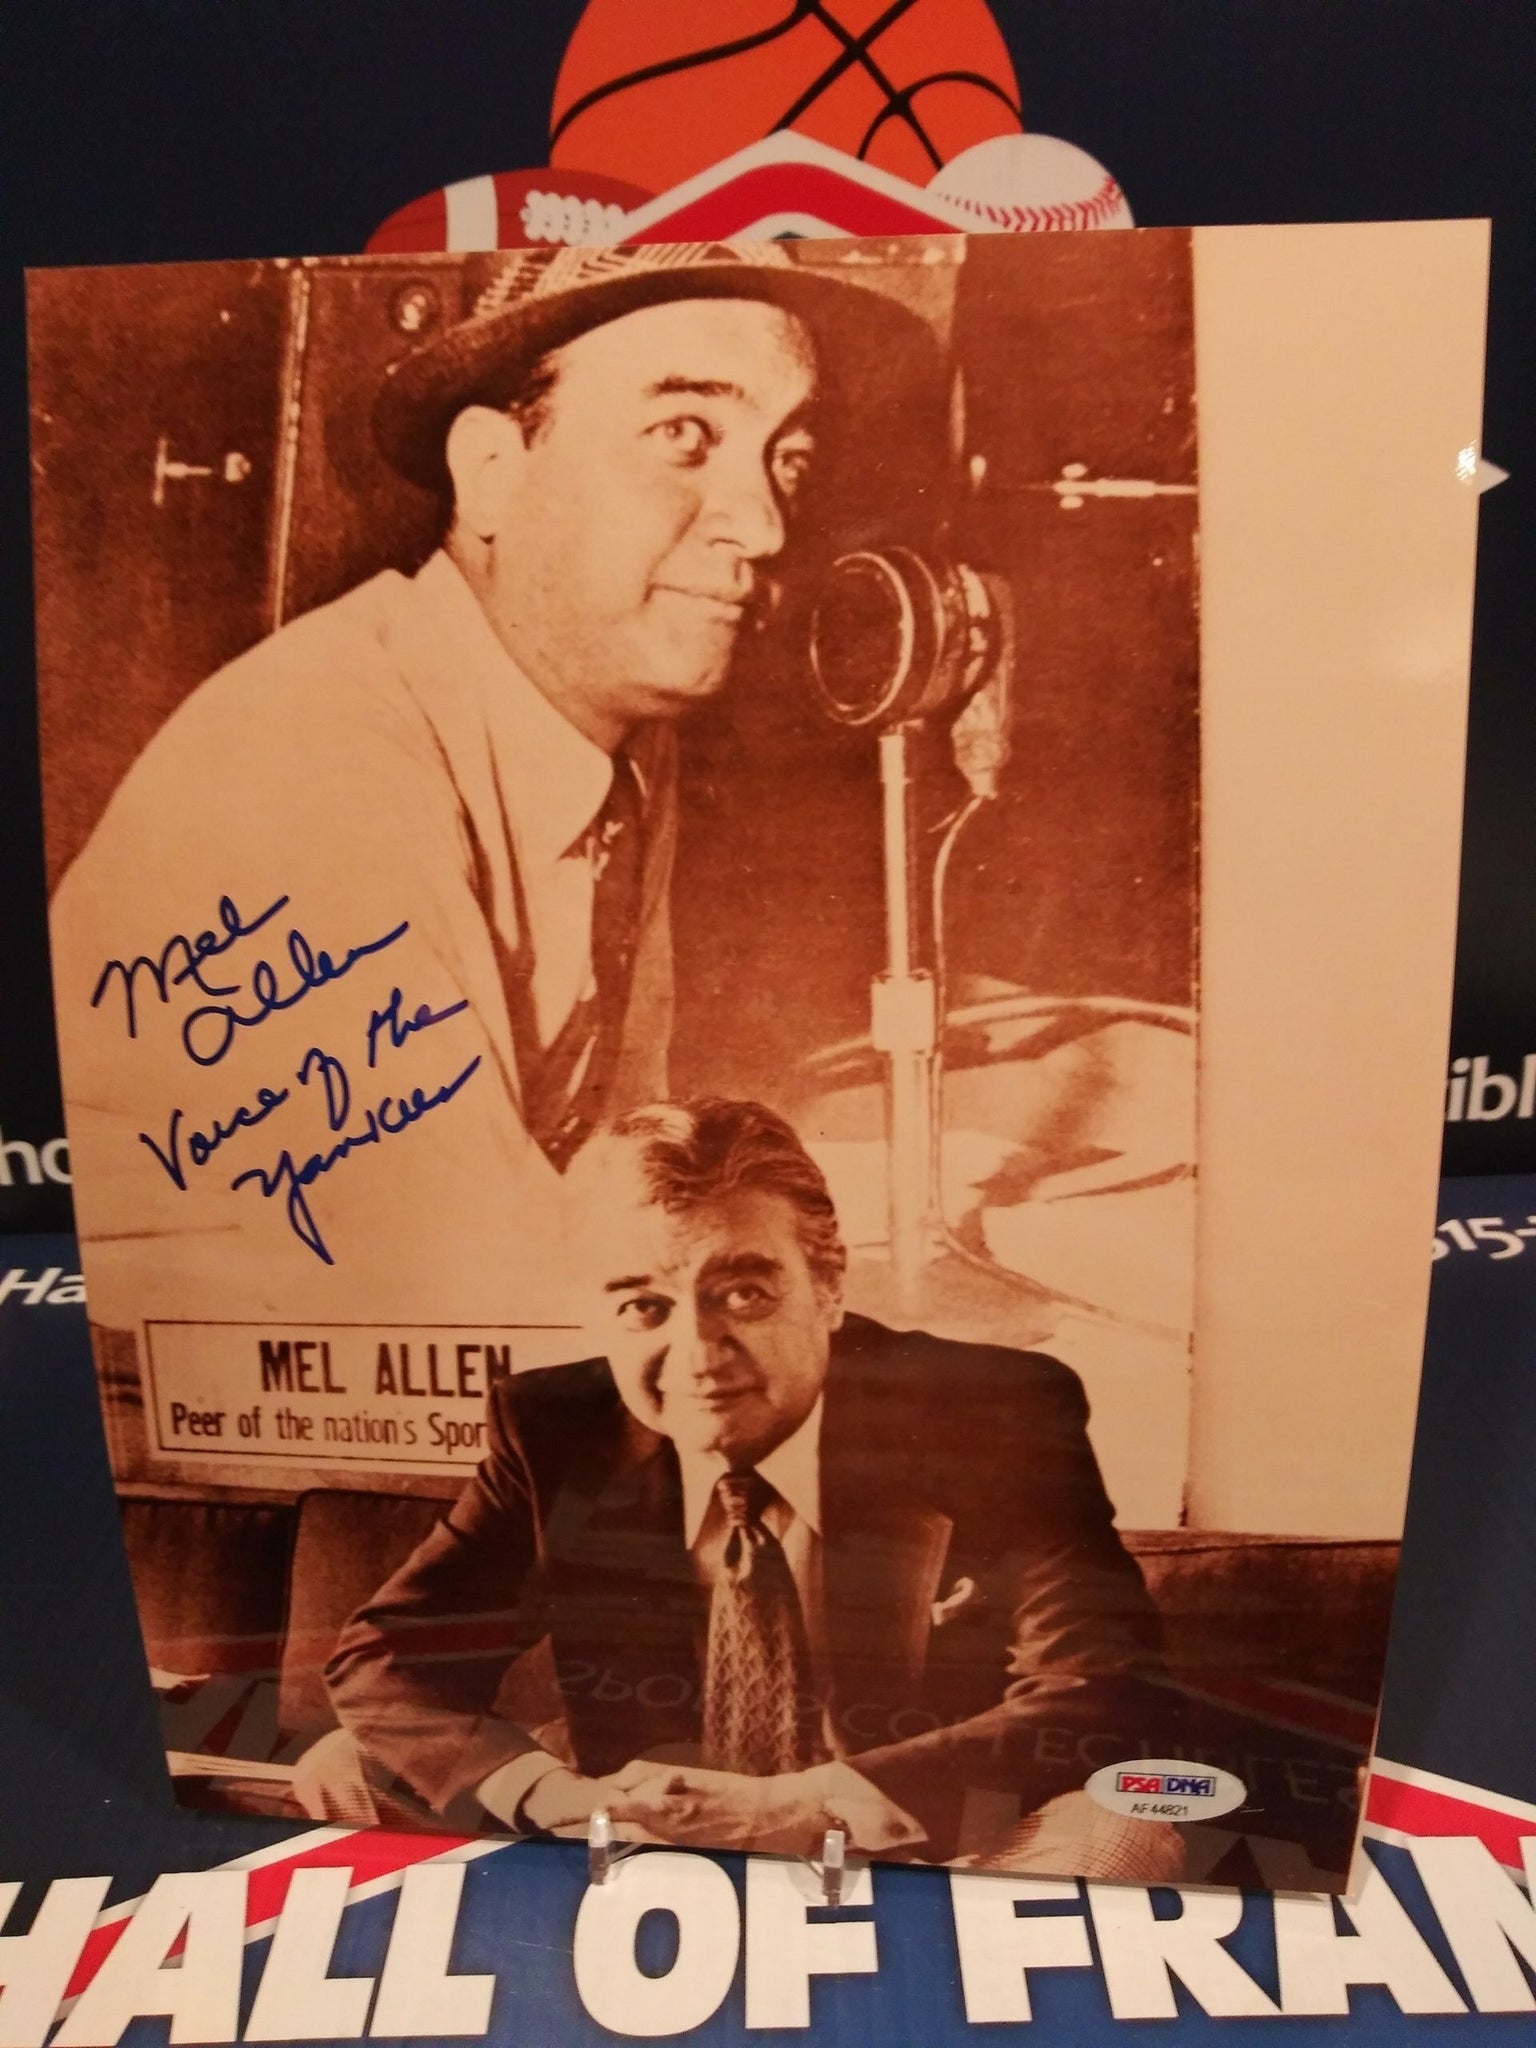 MEL ALLEN NY YANKEES SIGNED PHOTO - INSC VOICE OF THE YANKEES PSA